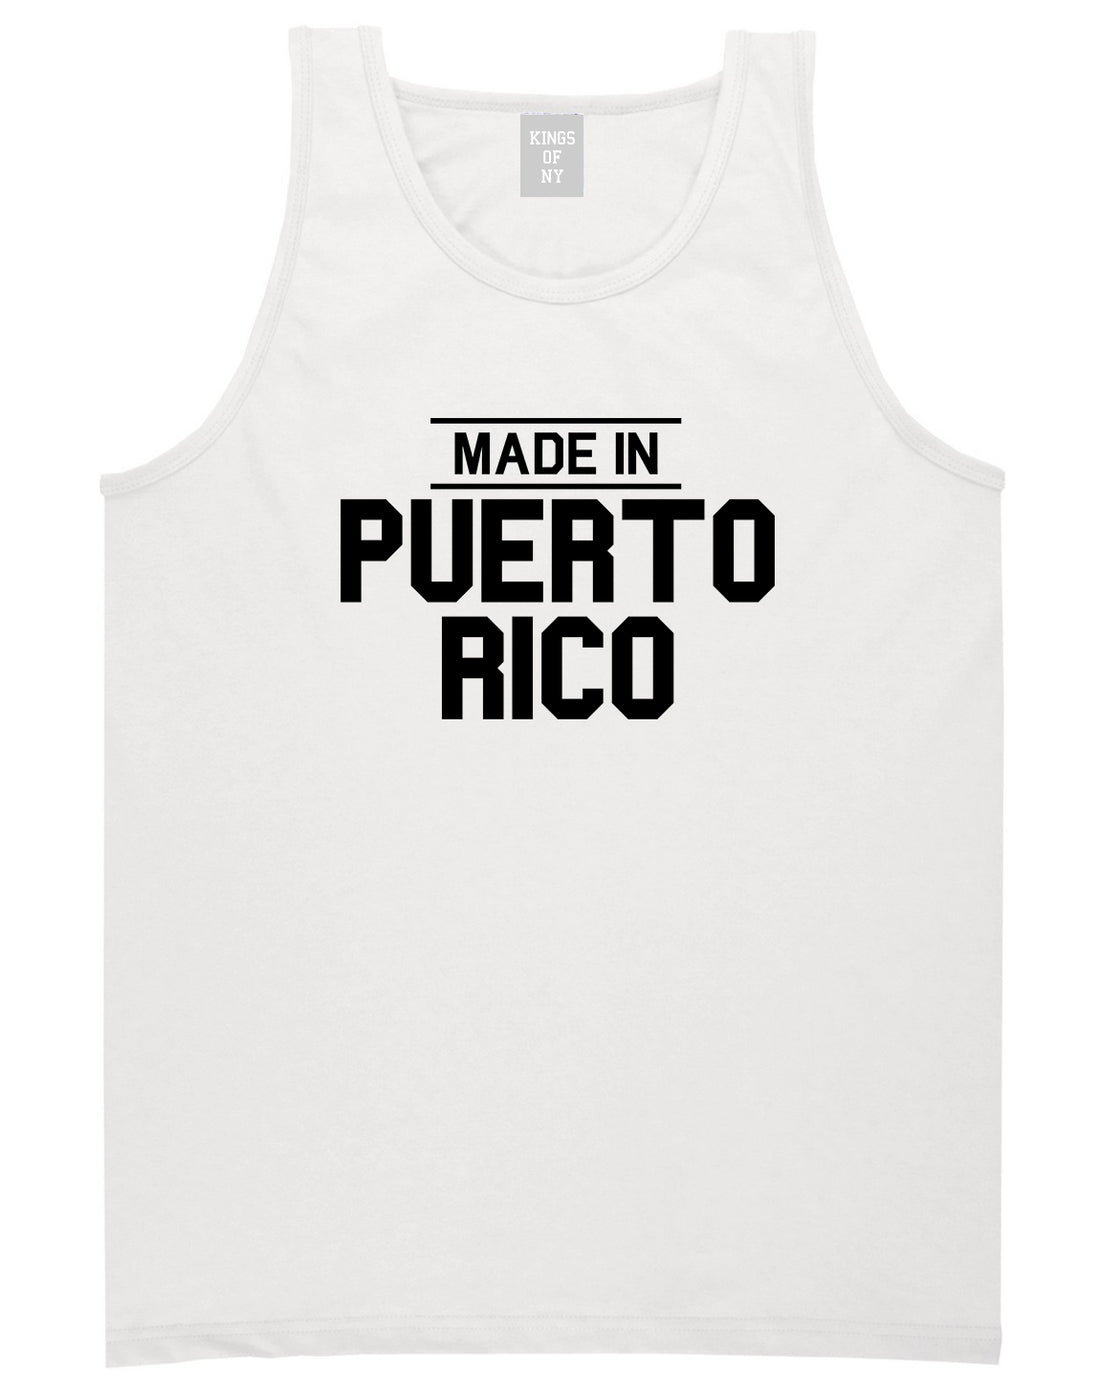 Made In Puerto Rico Mens Tank Top Shirt White